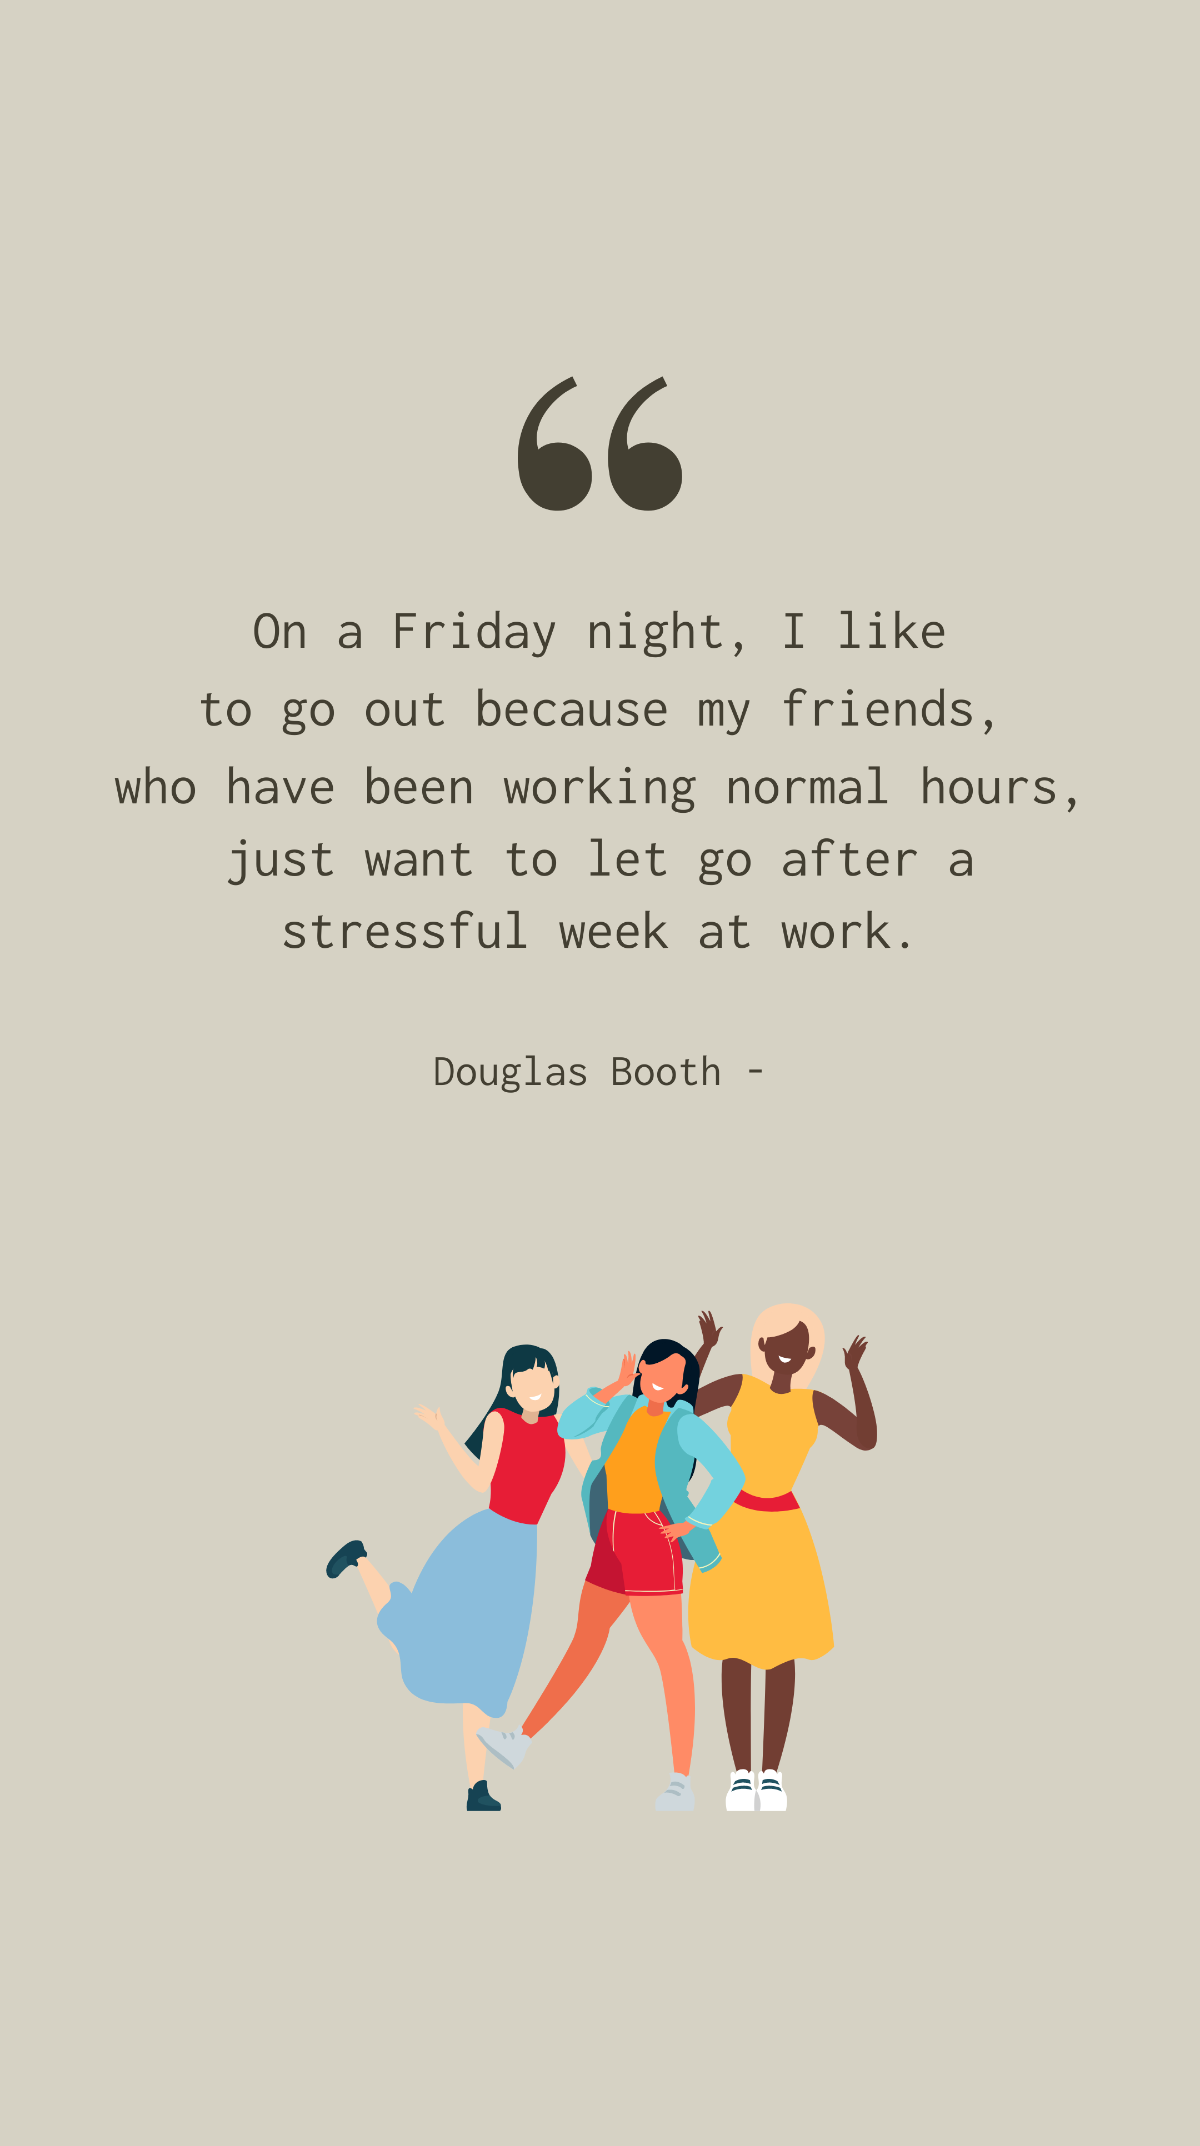 Douglas Booth - On a Friday night, I like to go out because my friends, who have been working normal hours, just want to let go after a stressful week at work.